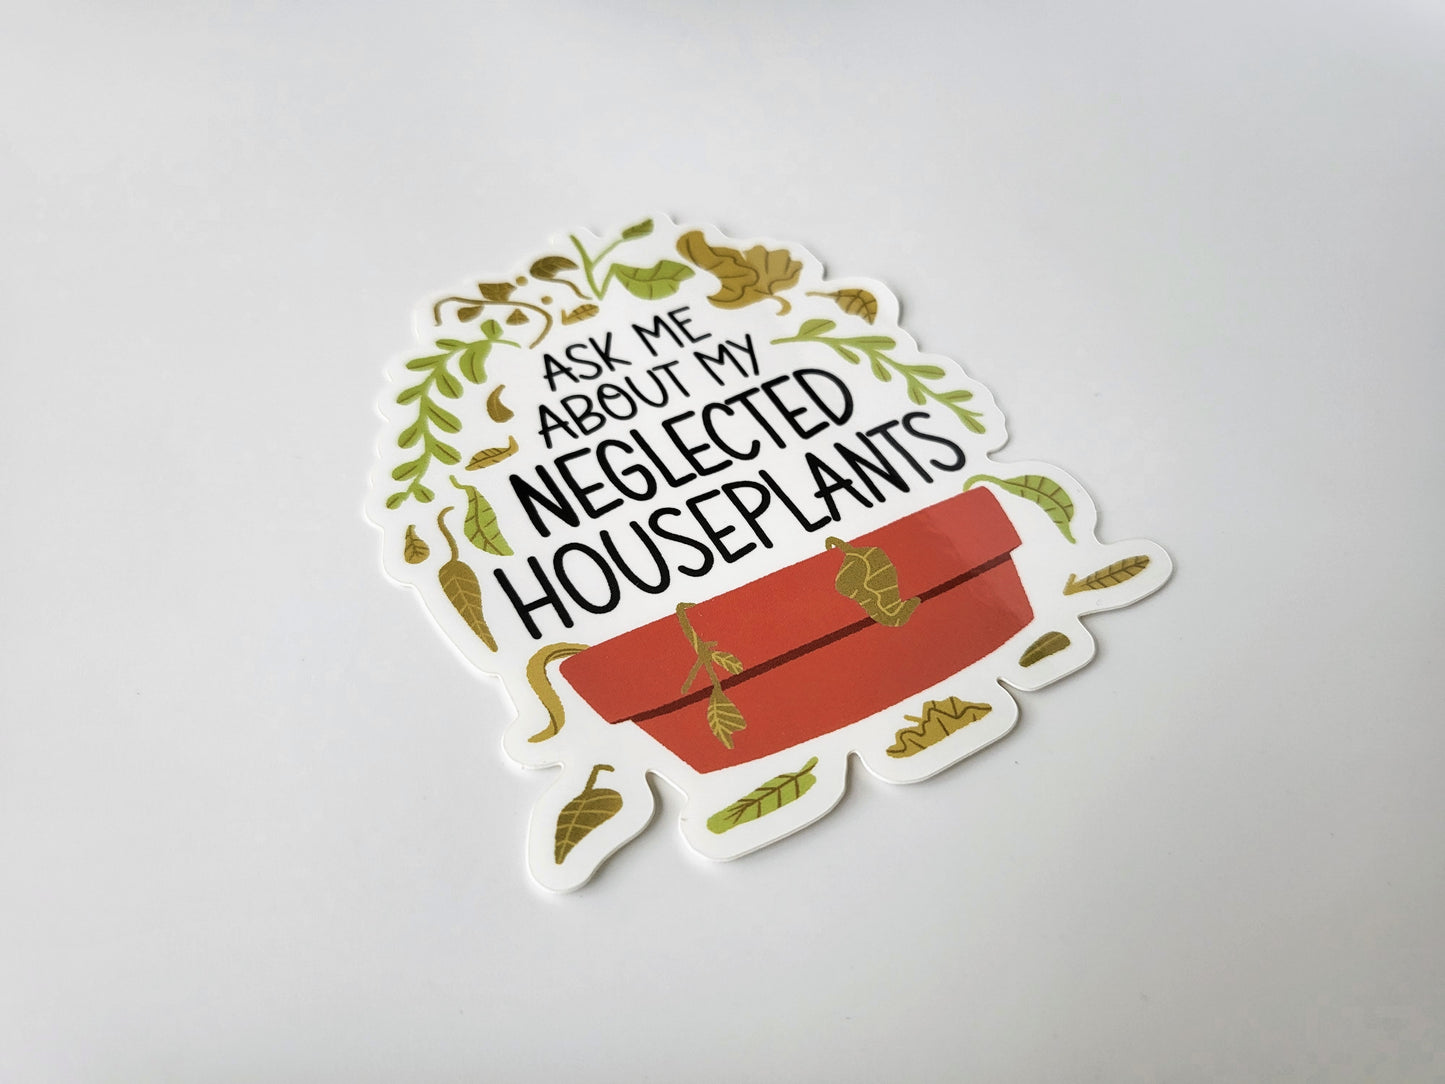 Neglected Houseplants - Funny Sticker for Indoor Plant Lovers